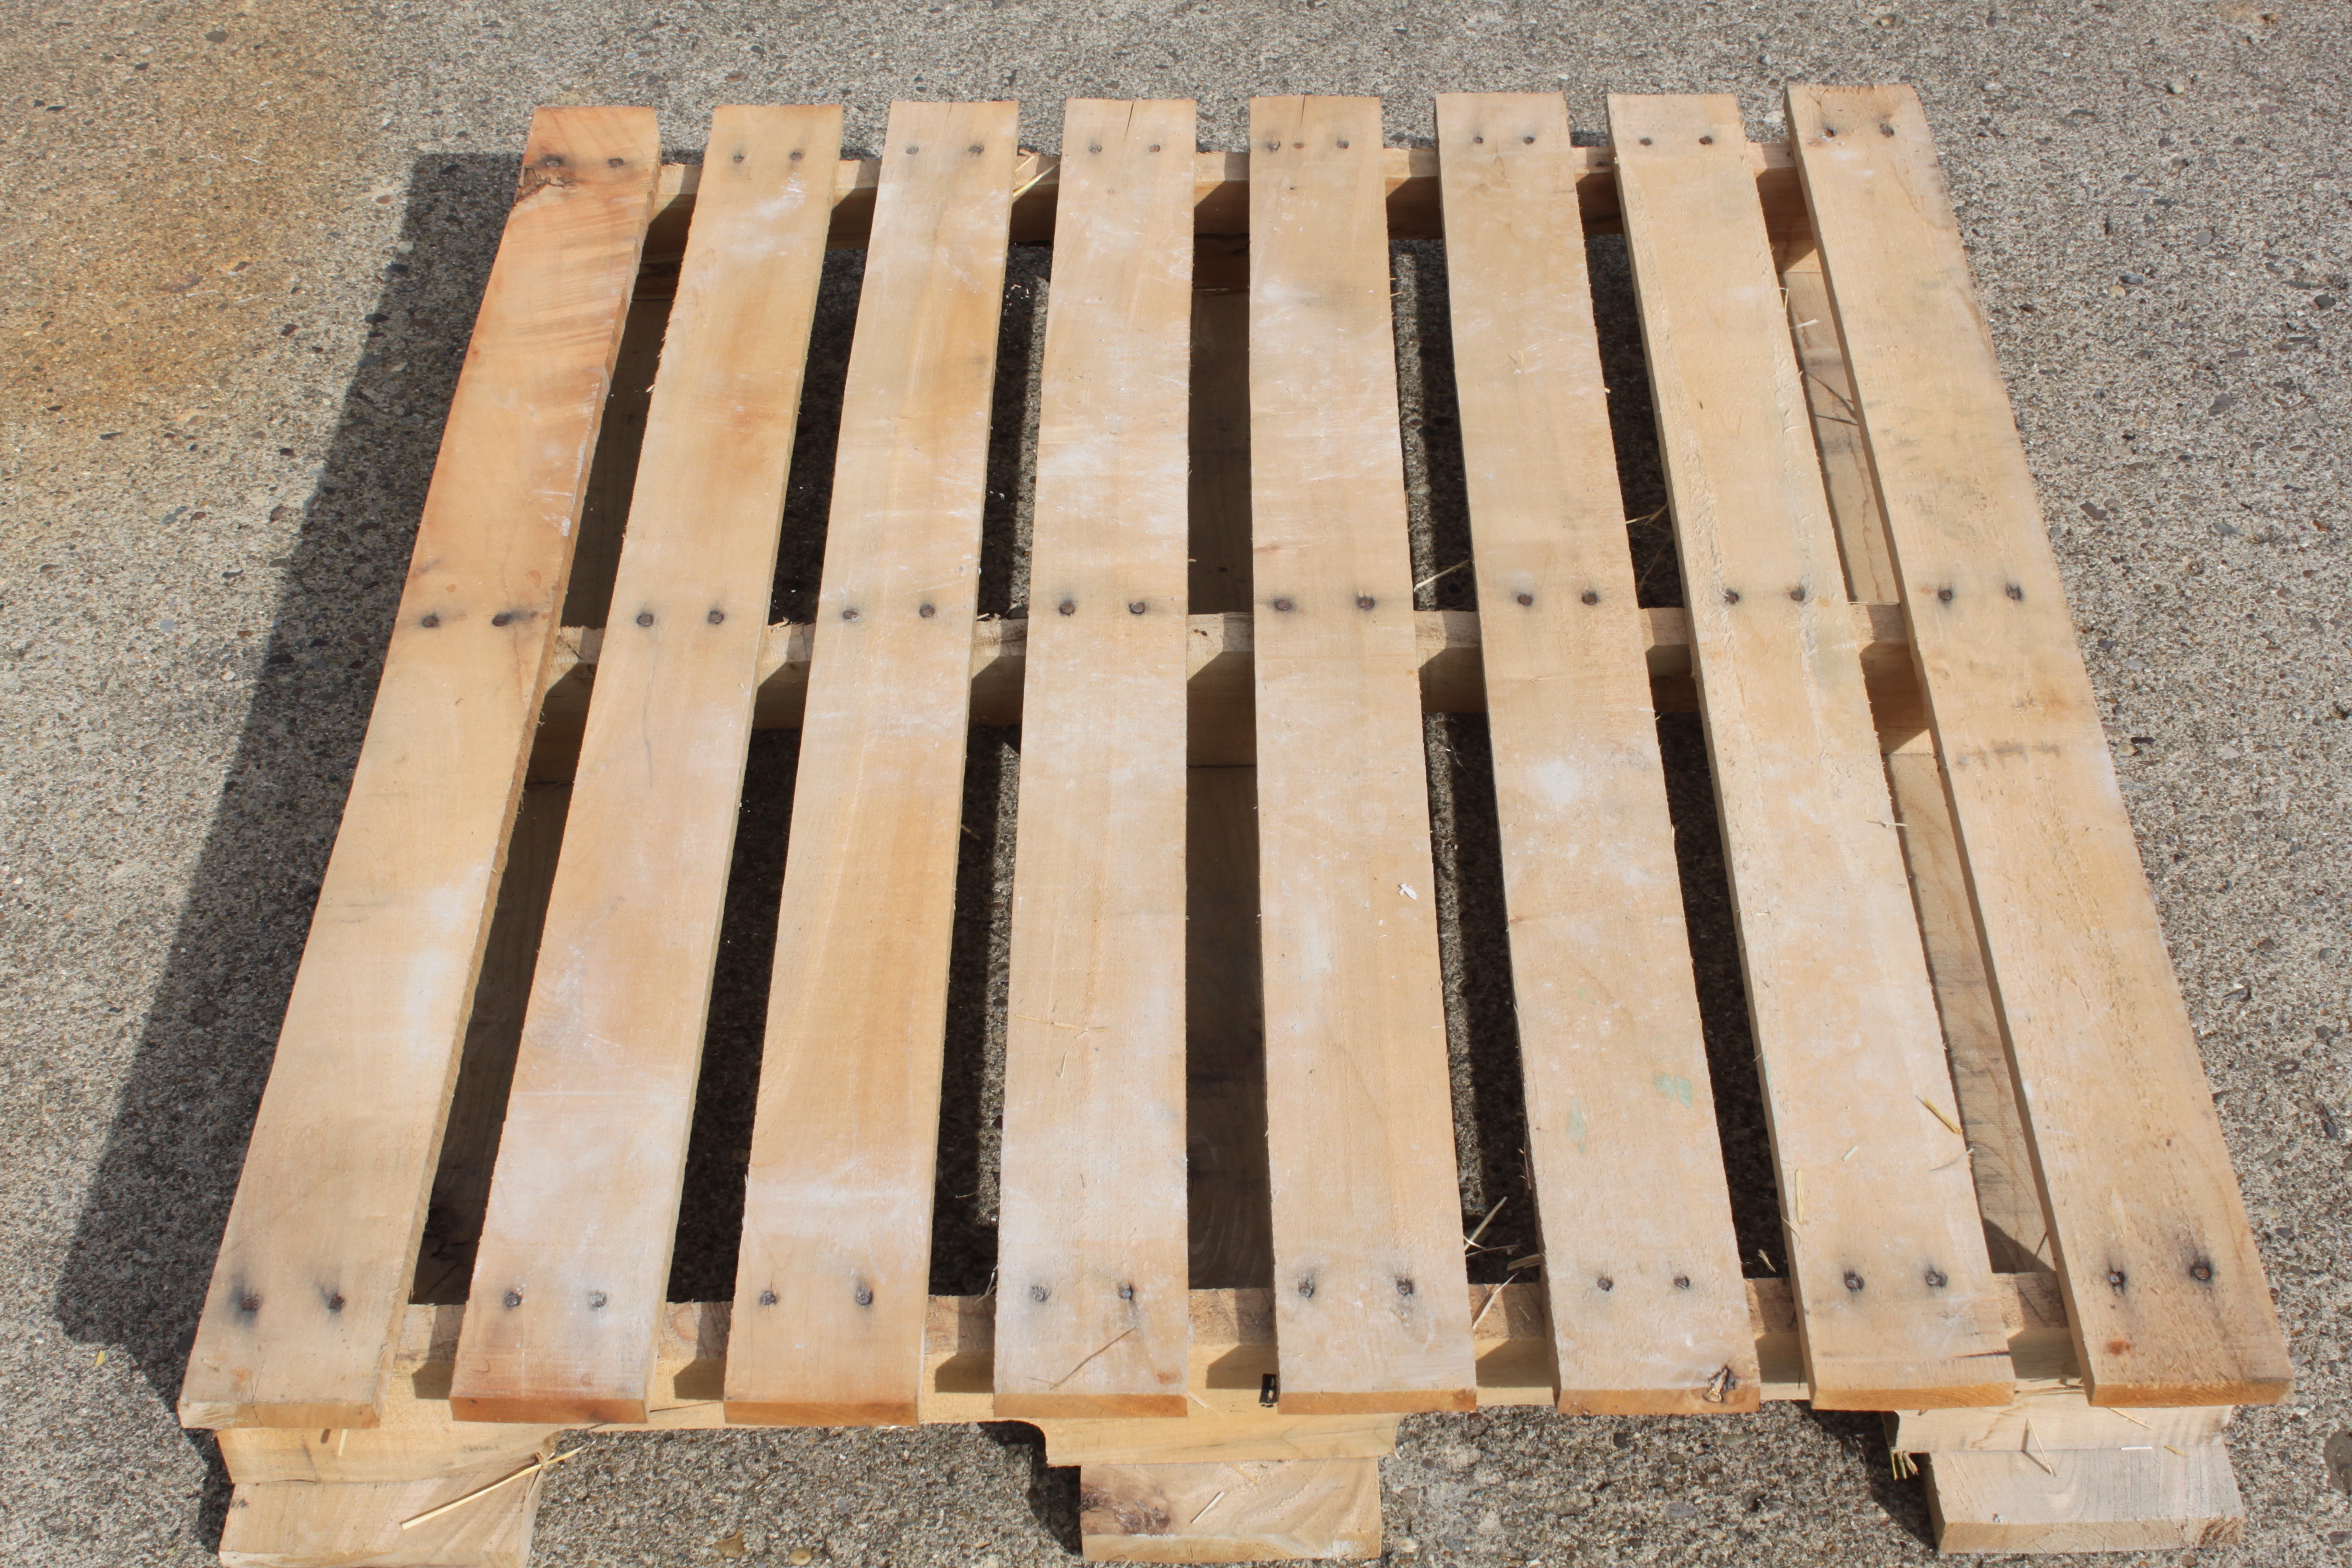 Building With Pallets – How to Disassemble A Pallet With Ease For ...